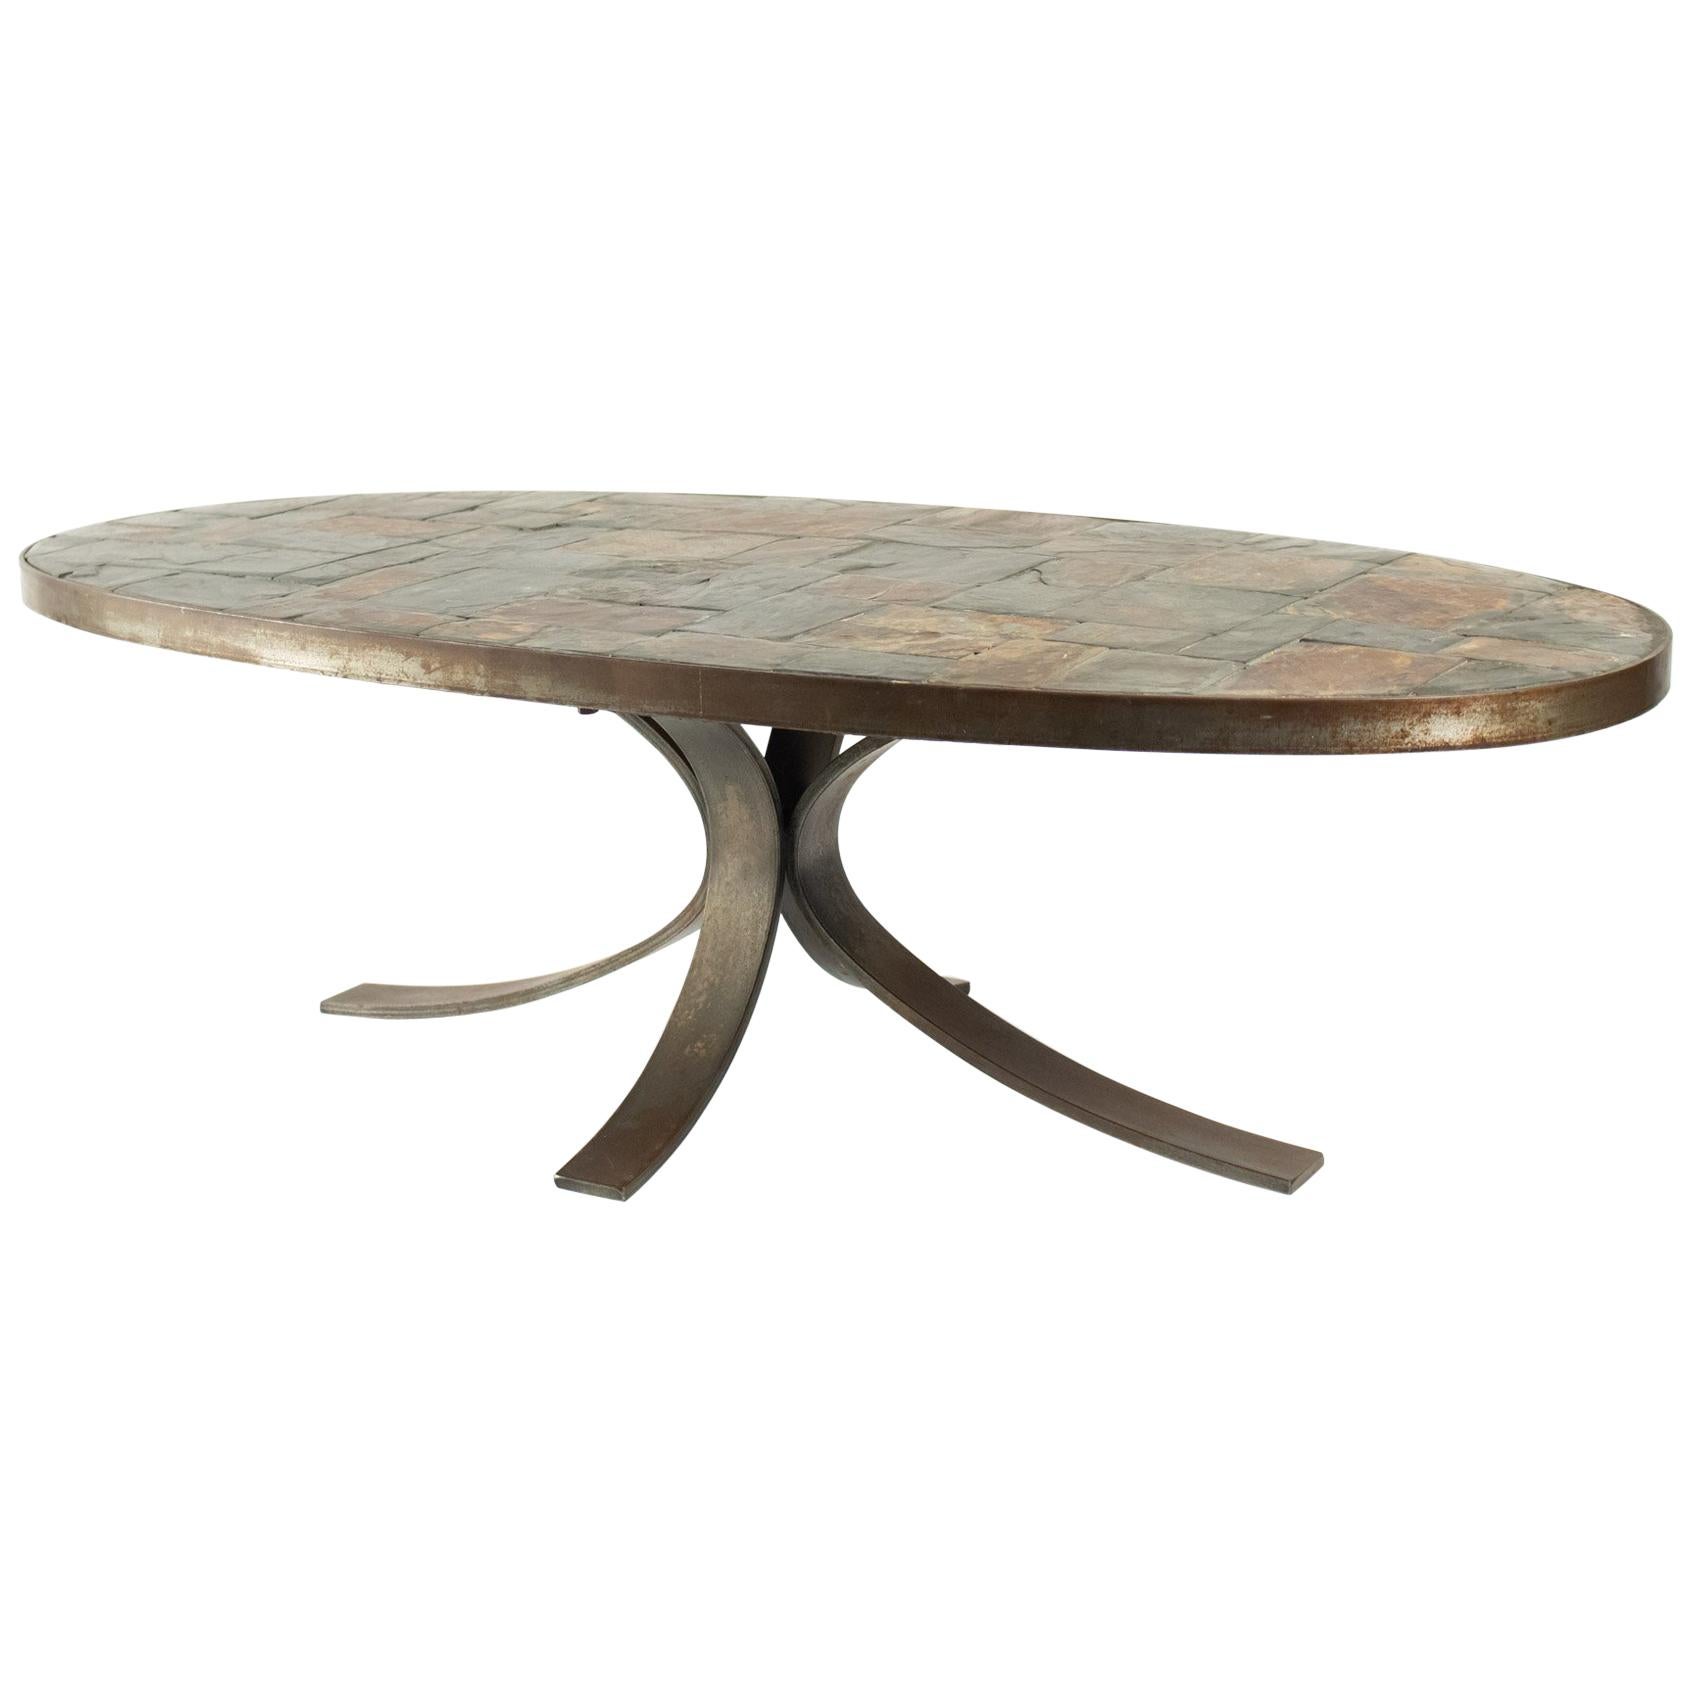 Oval Coffee Table in Wrought Iron and Stone from the Ardoise Mid-Century Modern